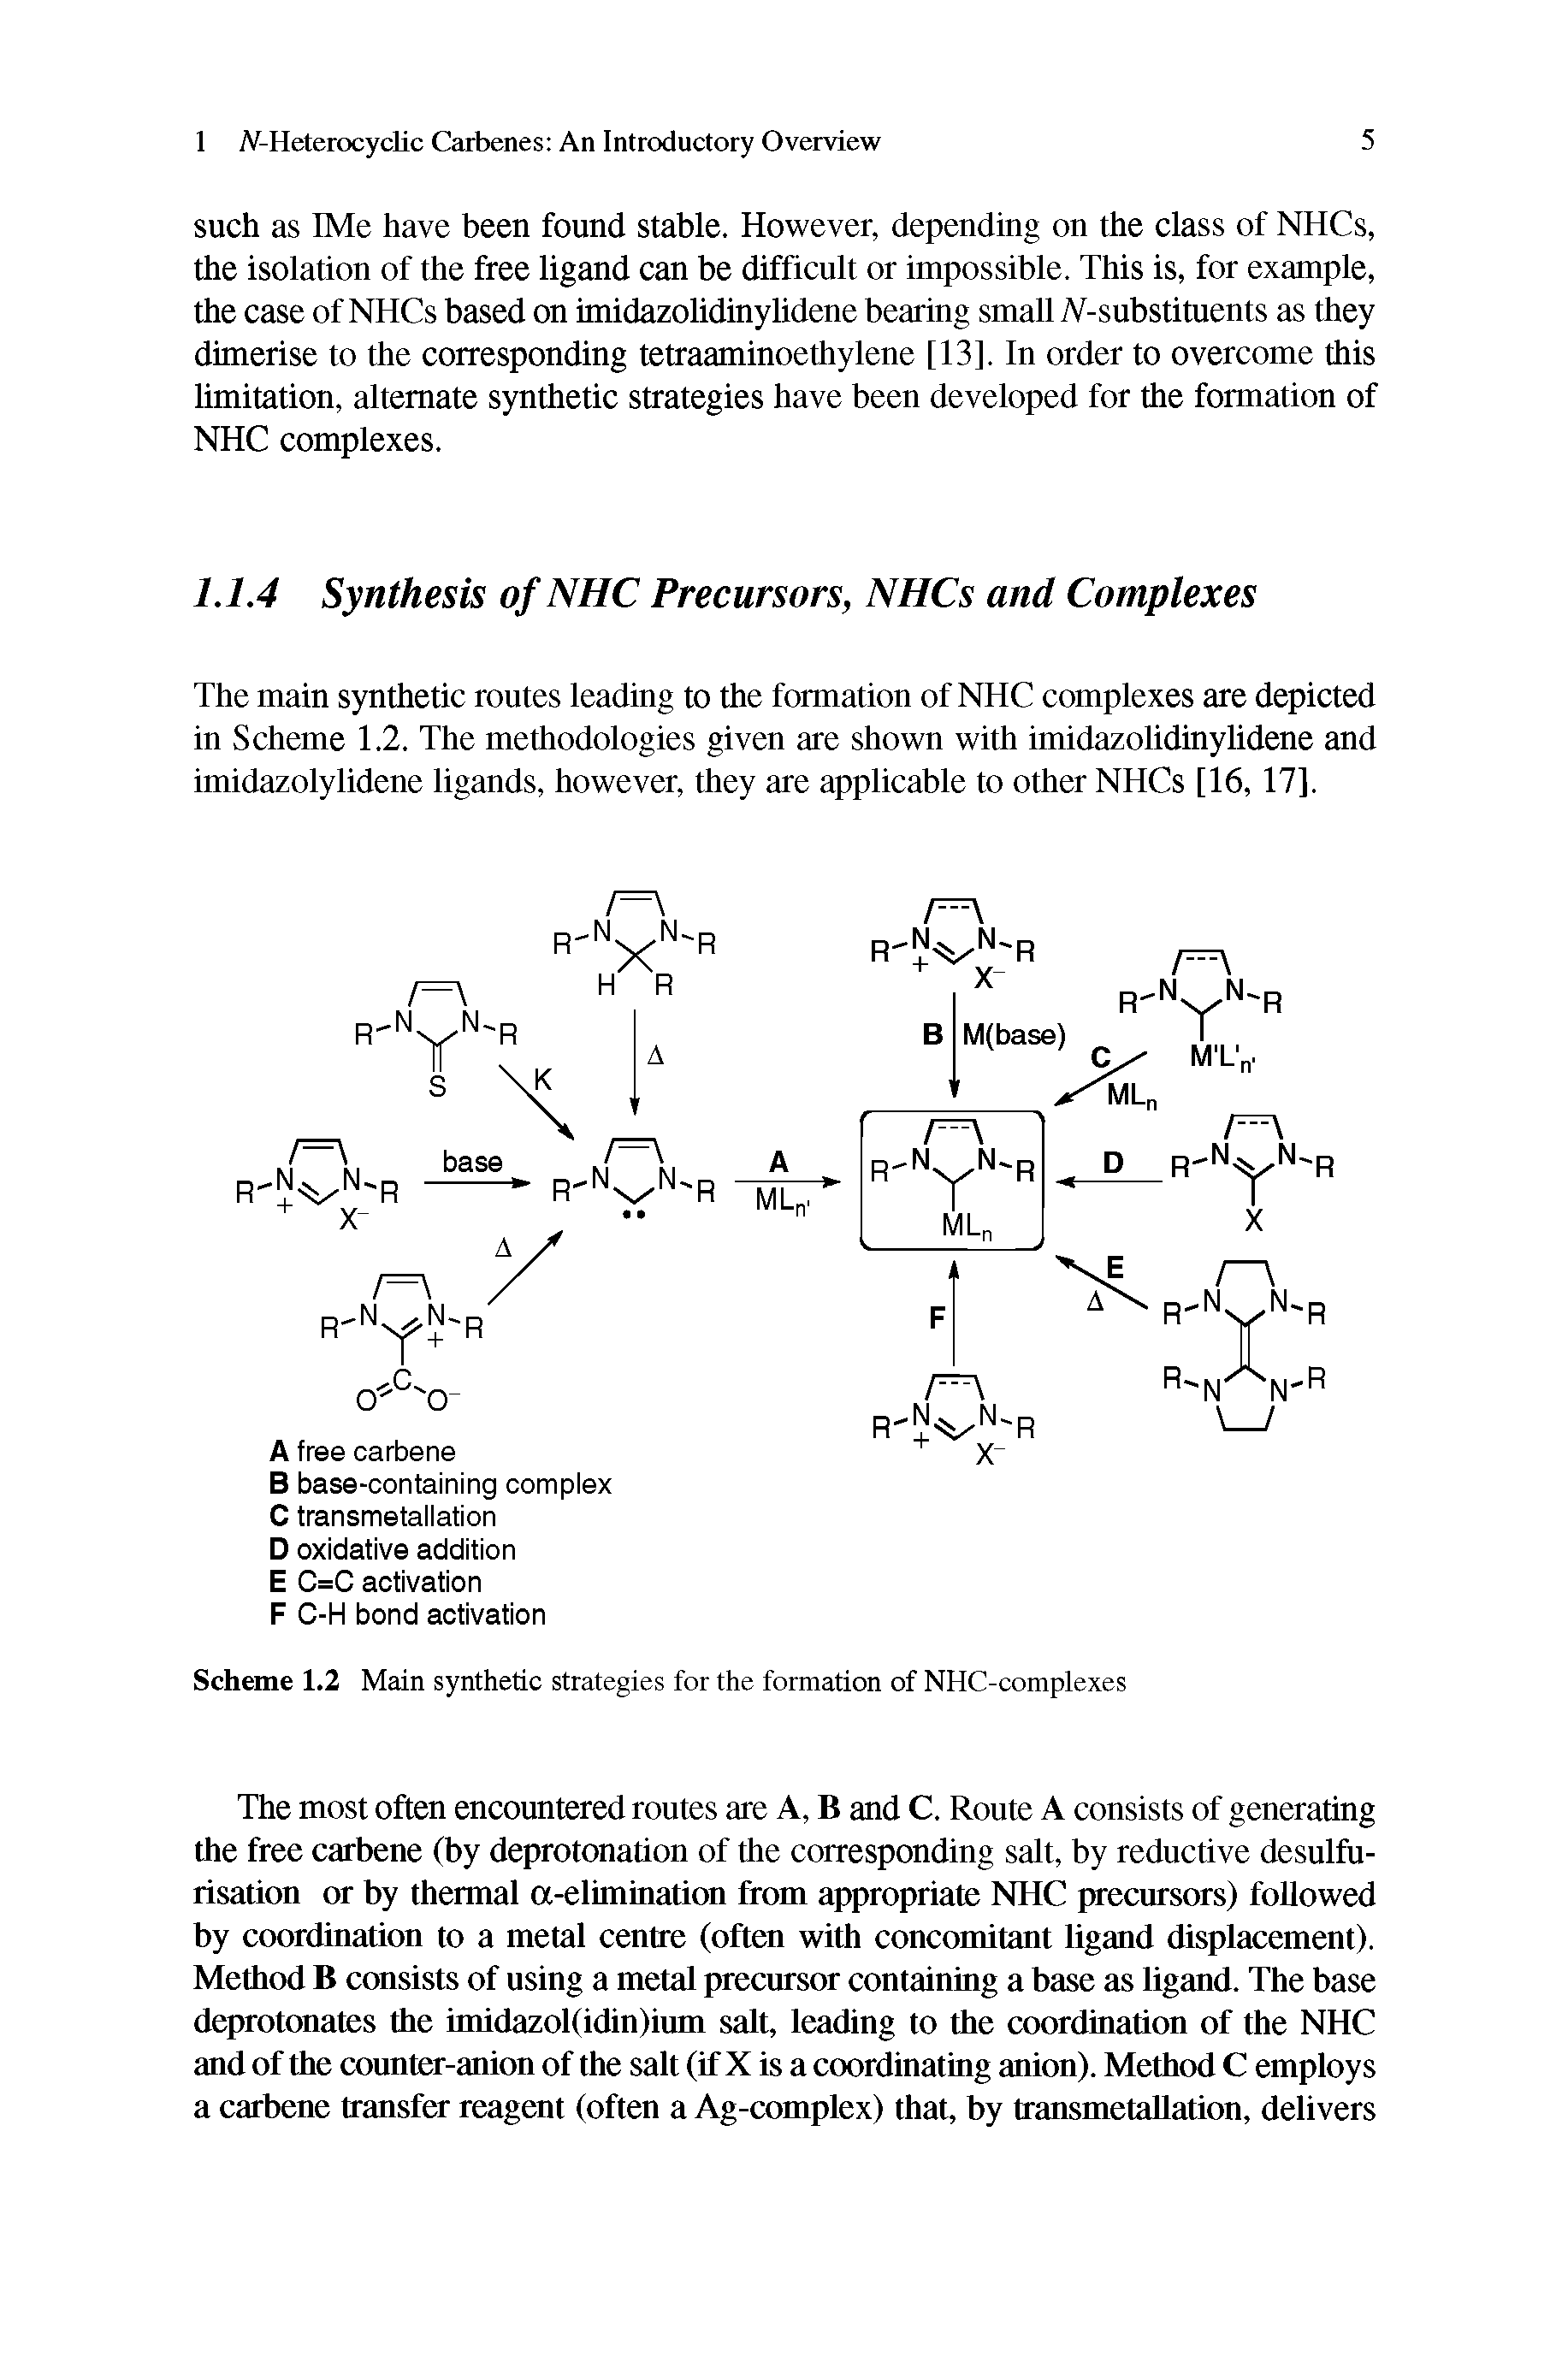 Scheme 1.2 Main synthetic strategies for the formation of NHC-complexes...